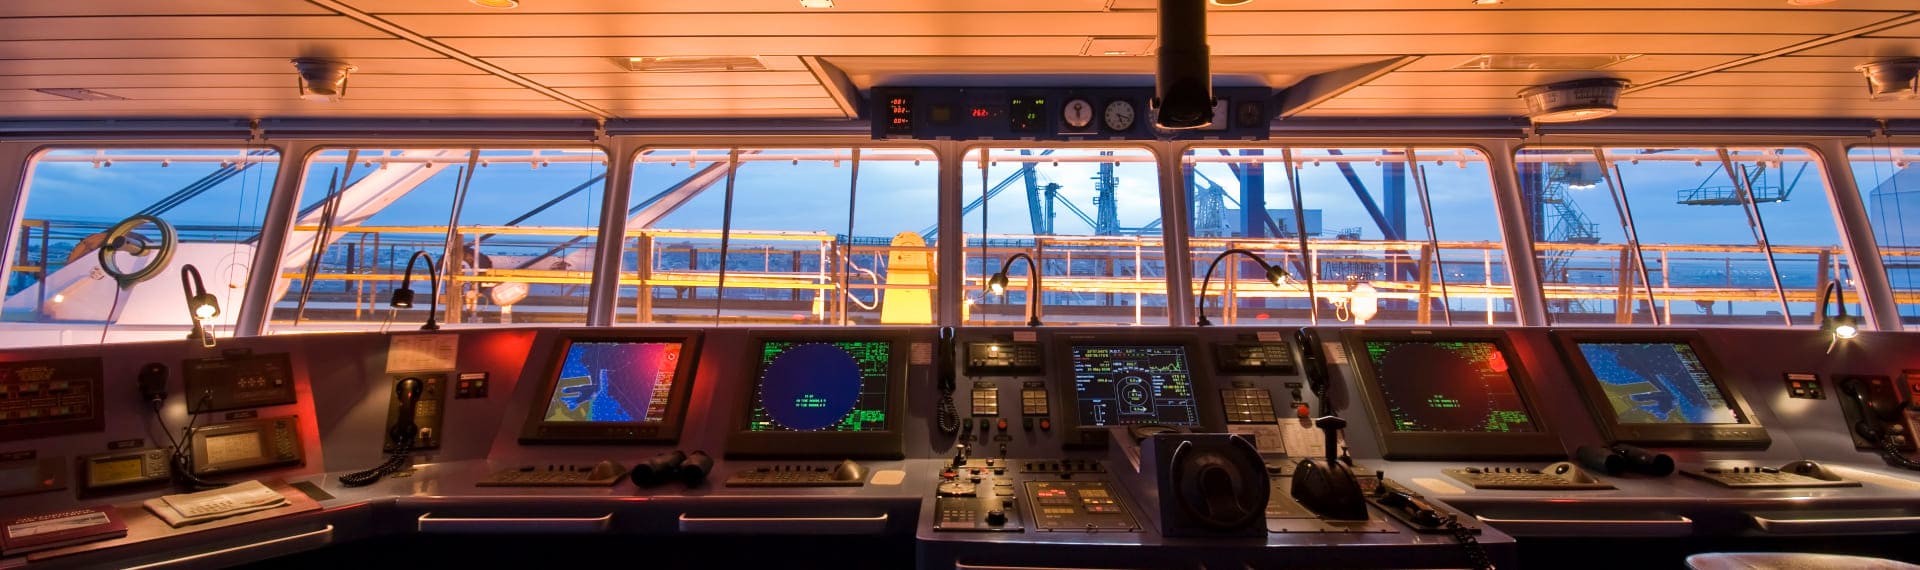 Professional marine electronics and integrated solutions for ships